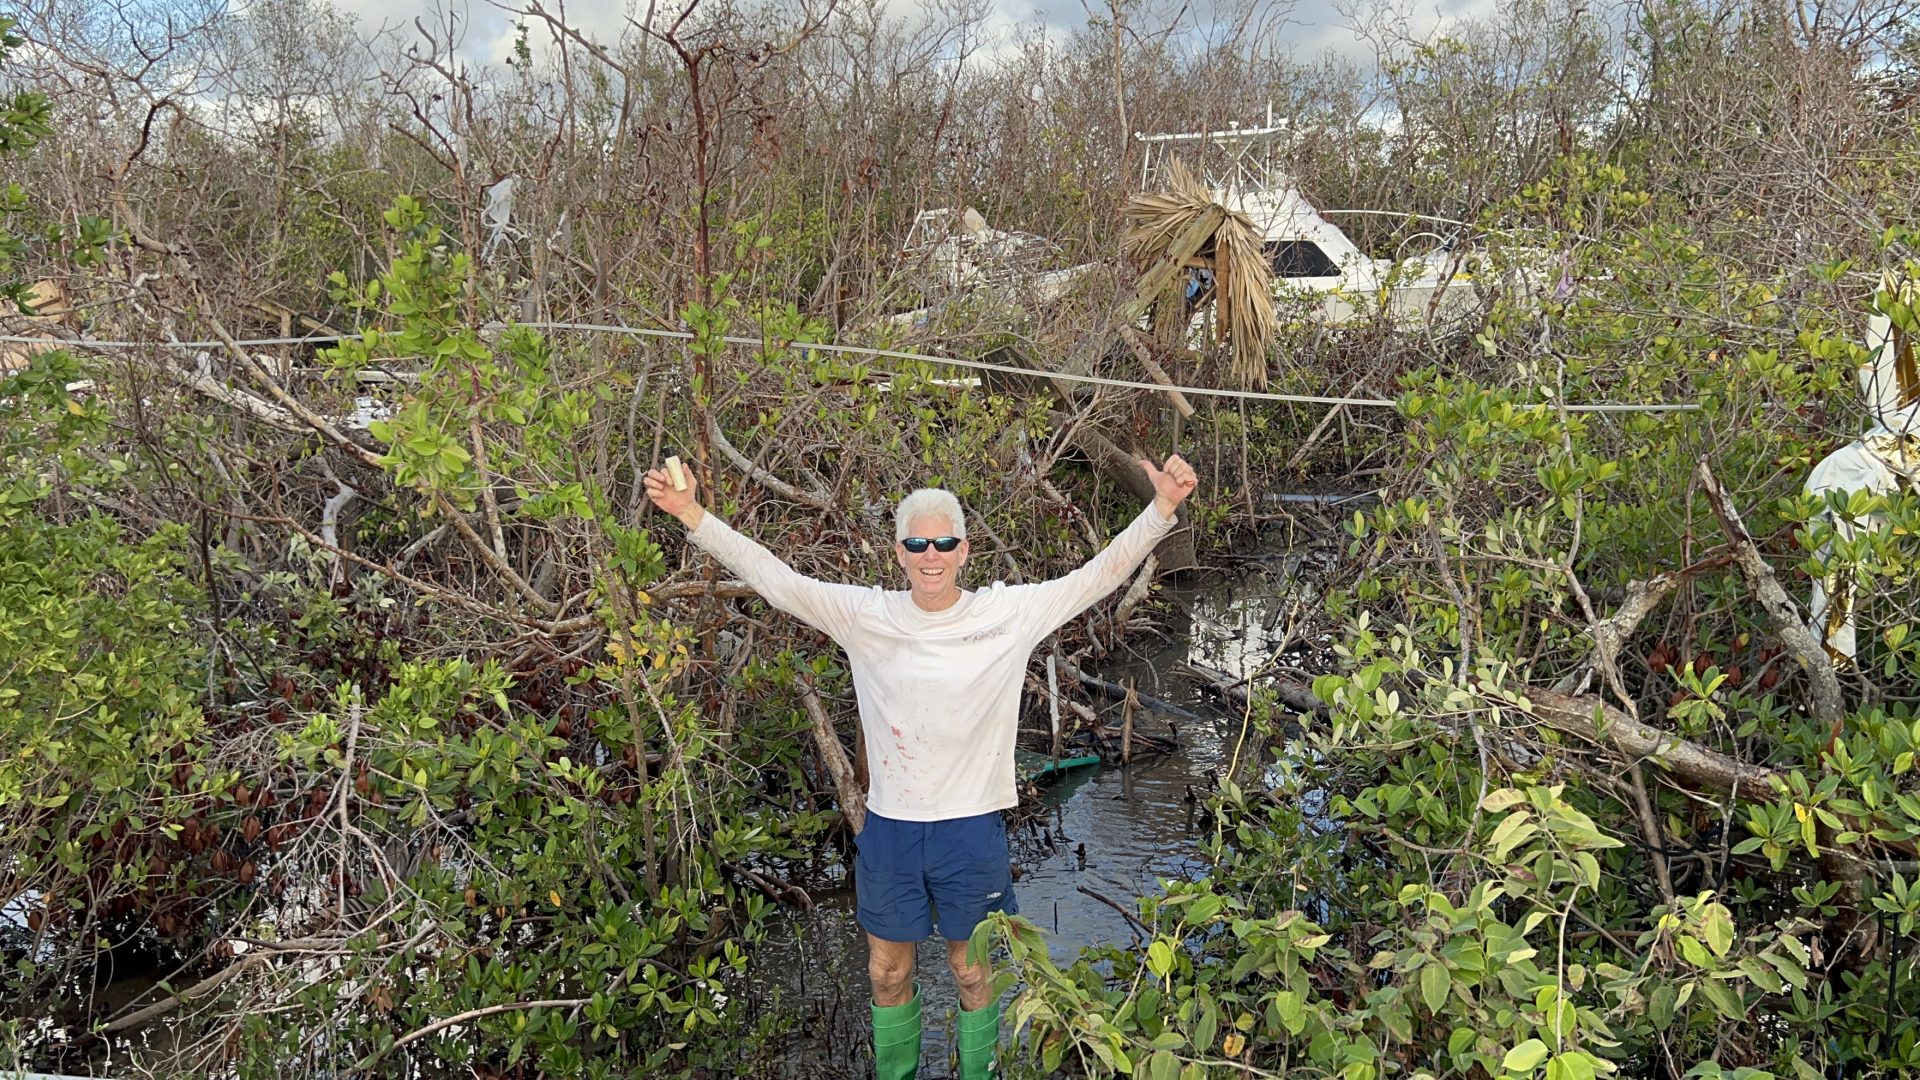 Bobby walking through the mangroves checking out the boat after the hurricane.<br />
Strong as an Ox <br />
Piece be with you buddy